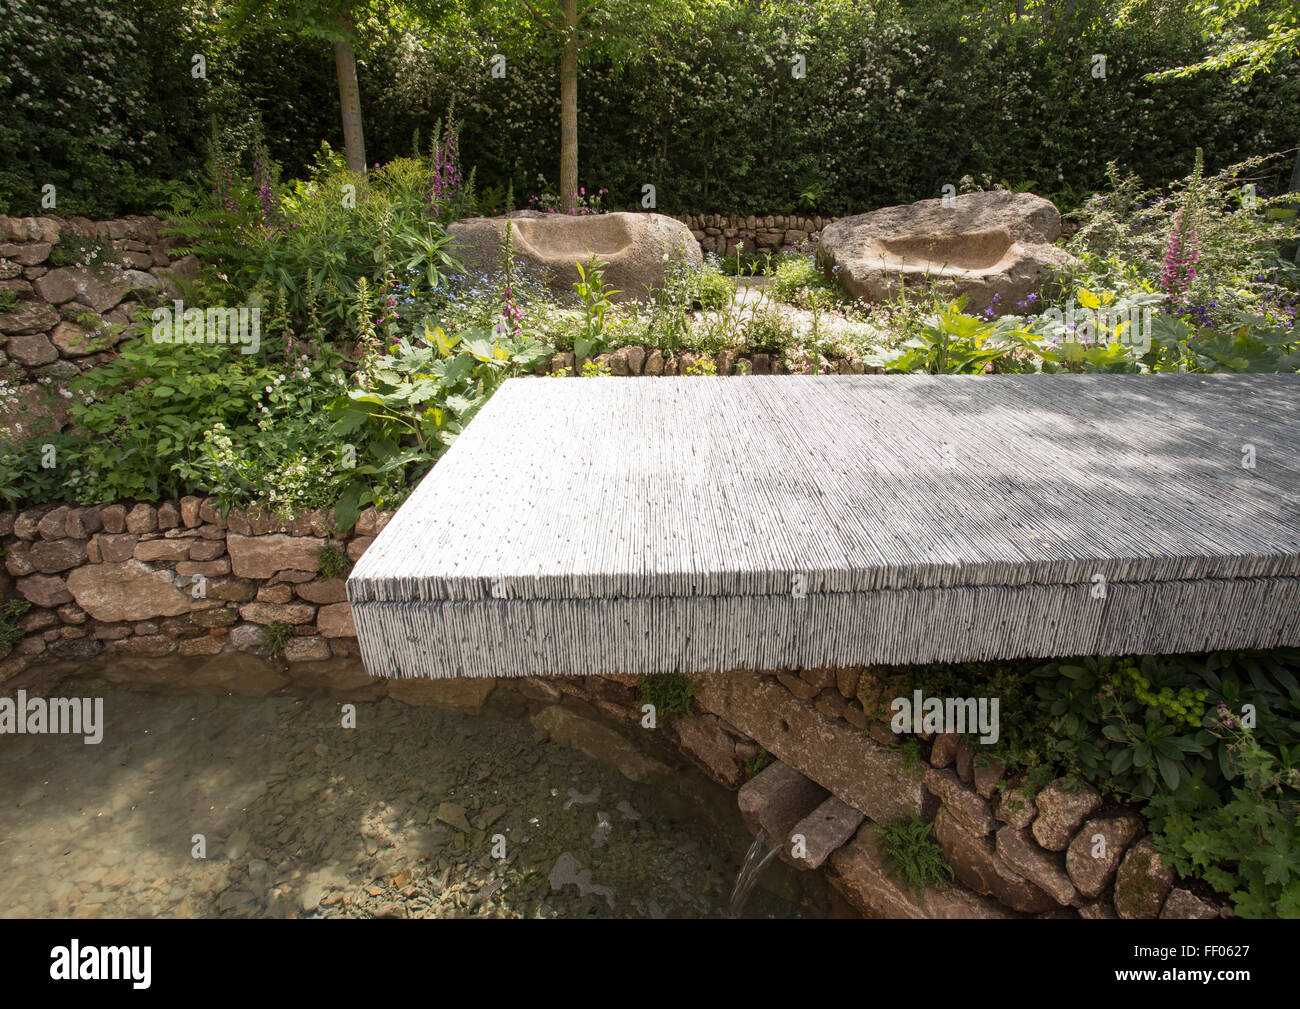 The Brewin Dolphin Garden - floating slate platform over water feature pool, granite stone carved seats, dry Stock Photo